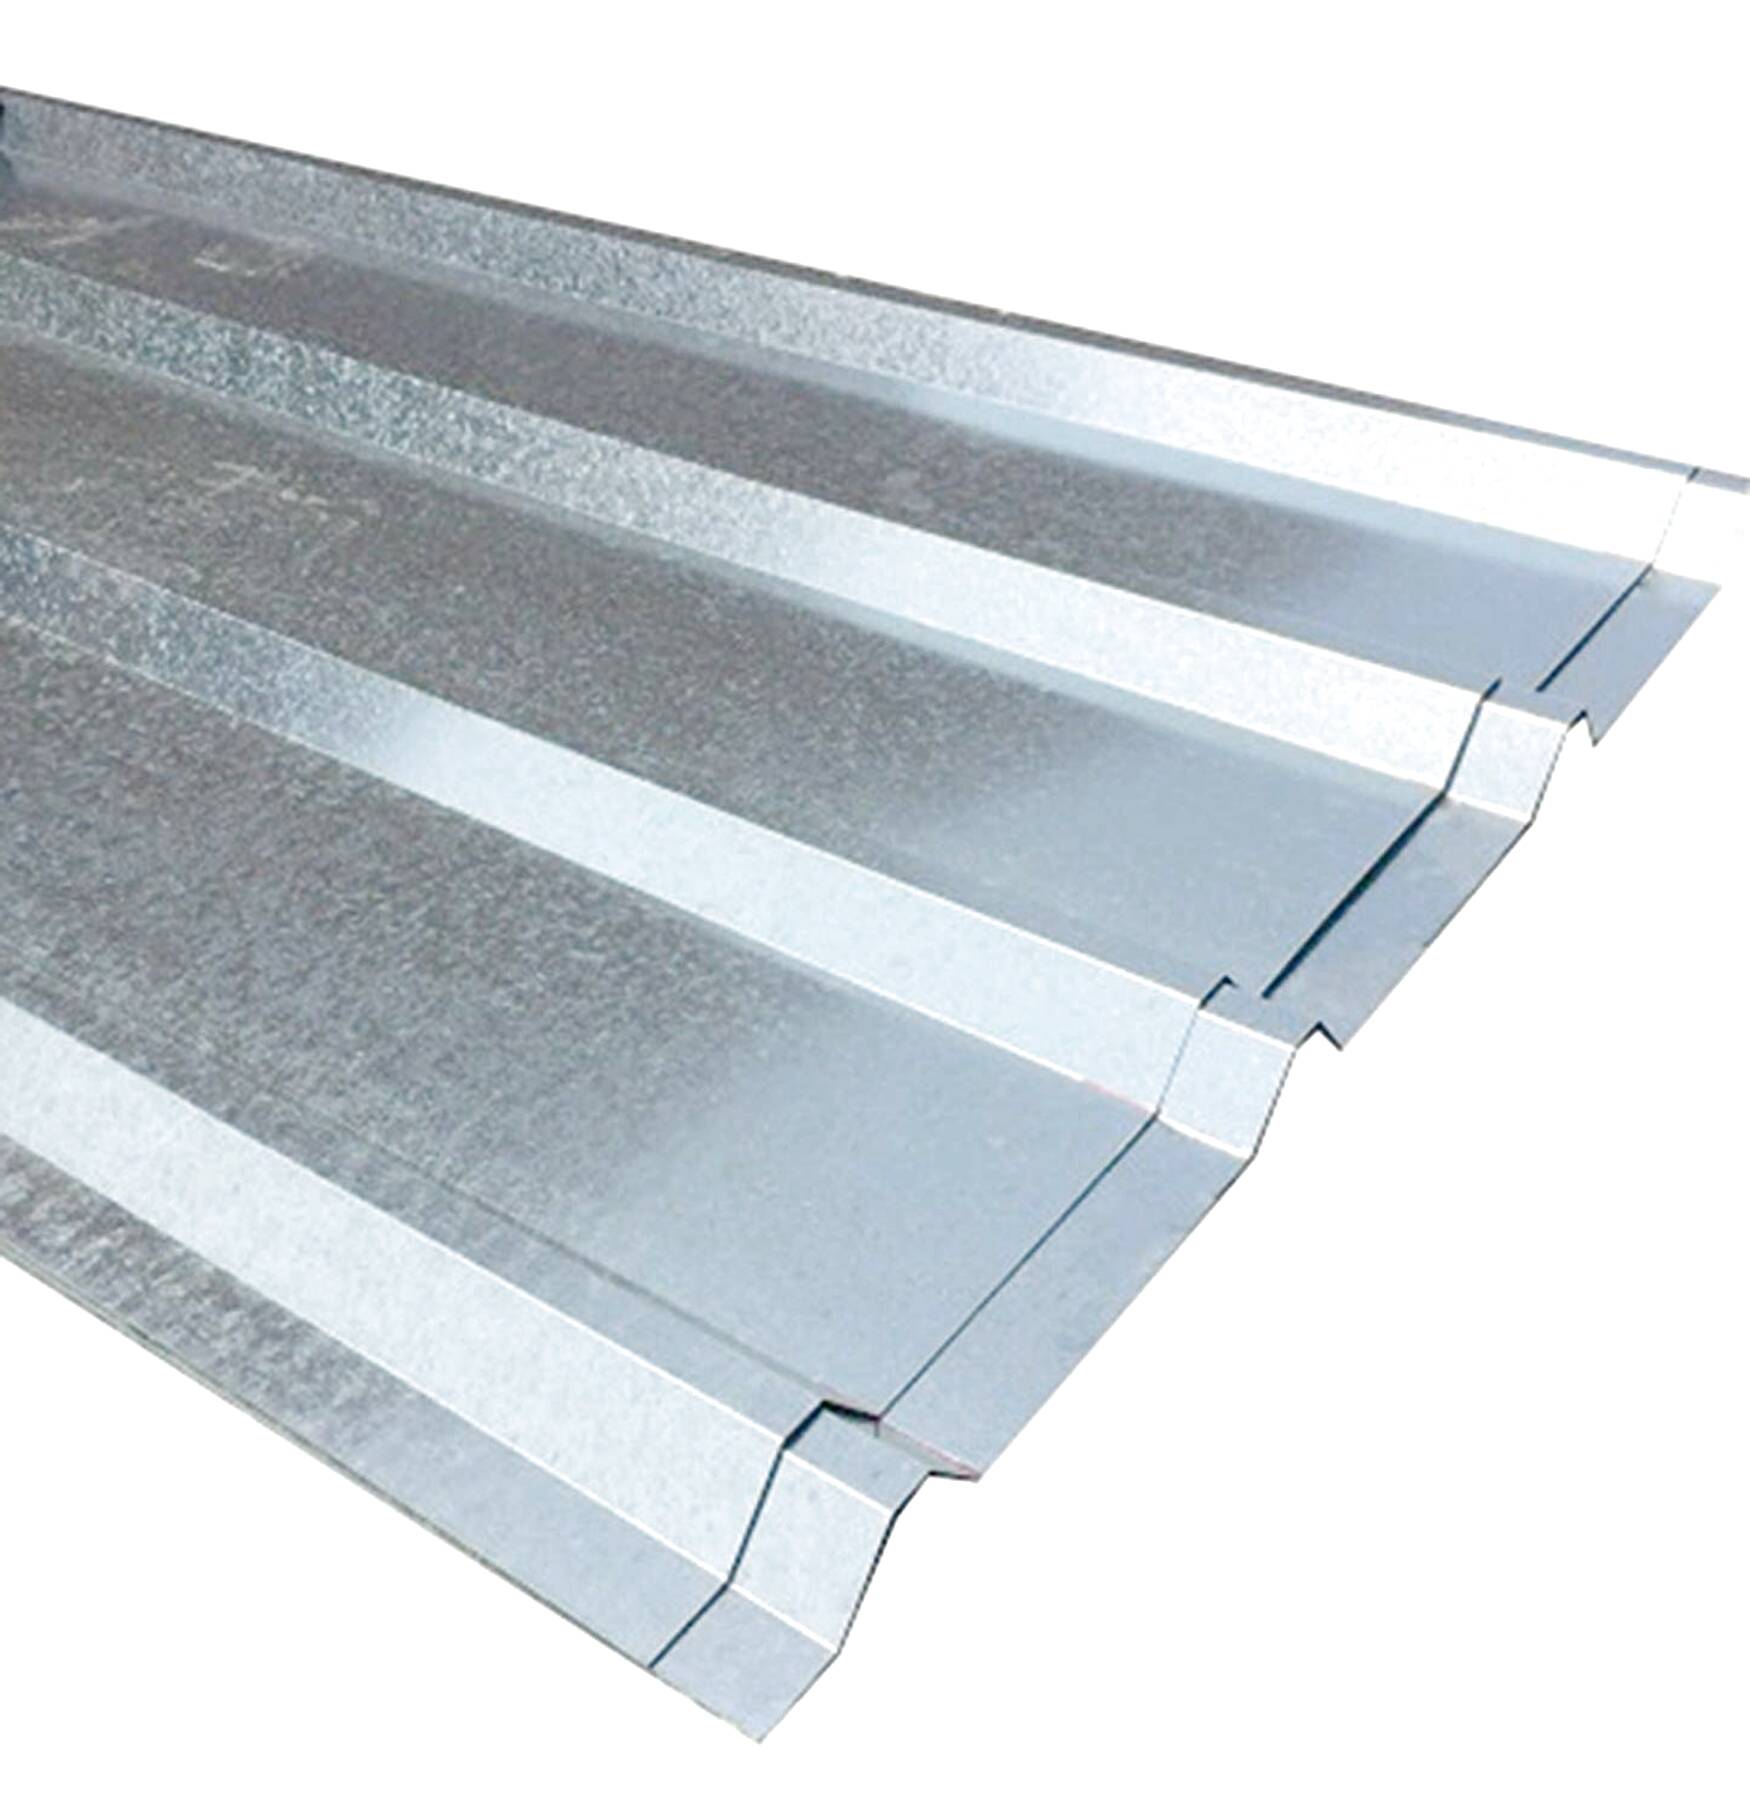 Metal Roofing Sheets for sale in UK View 20 bargains